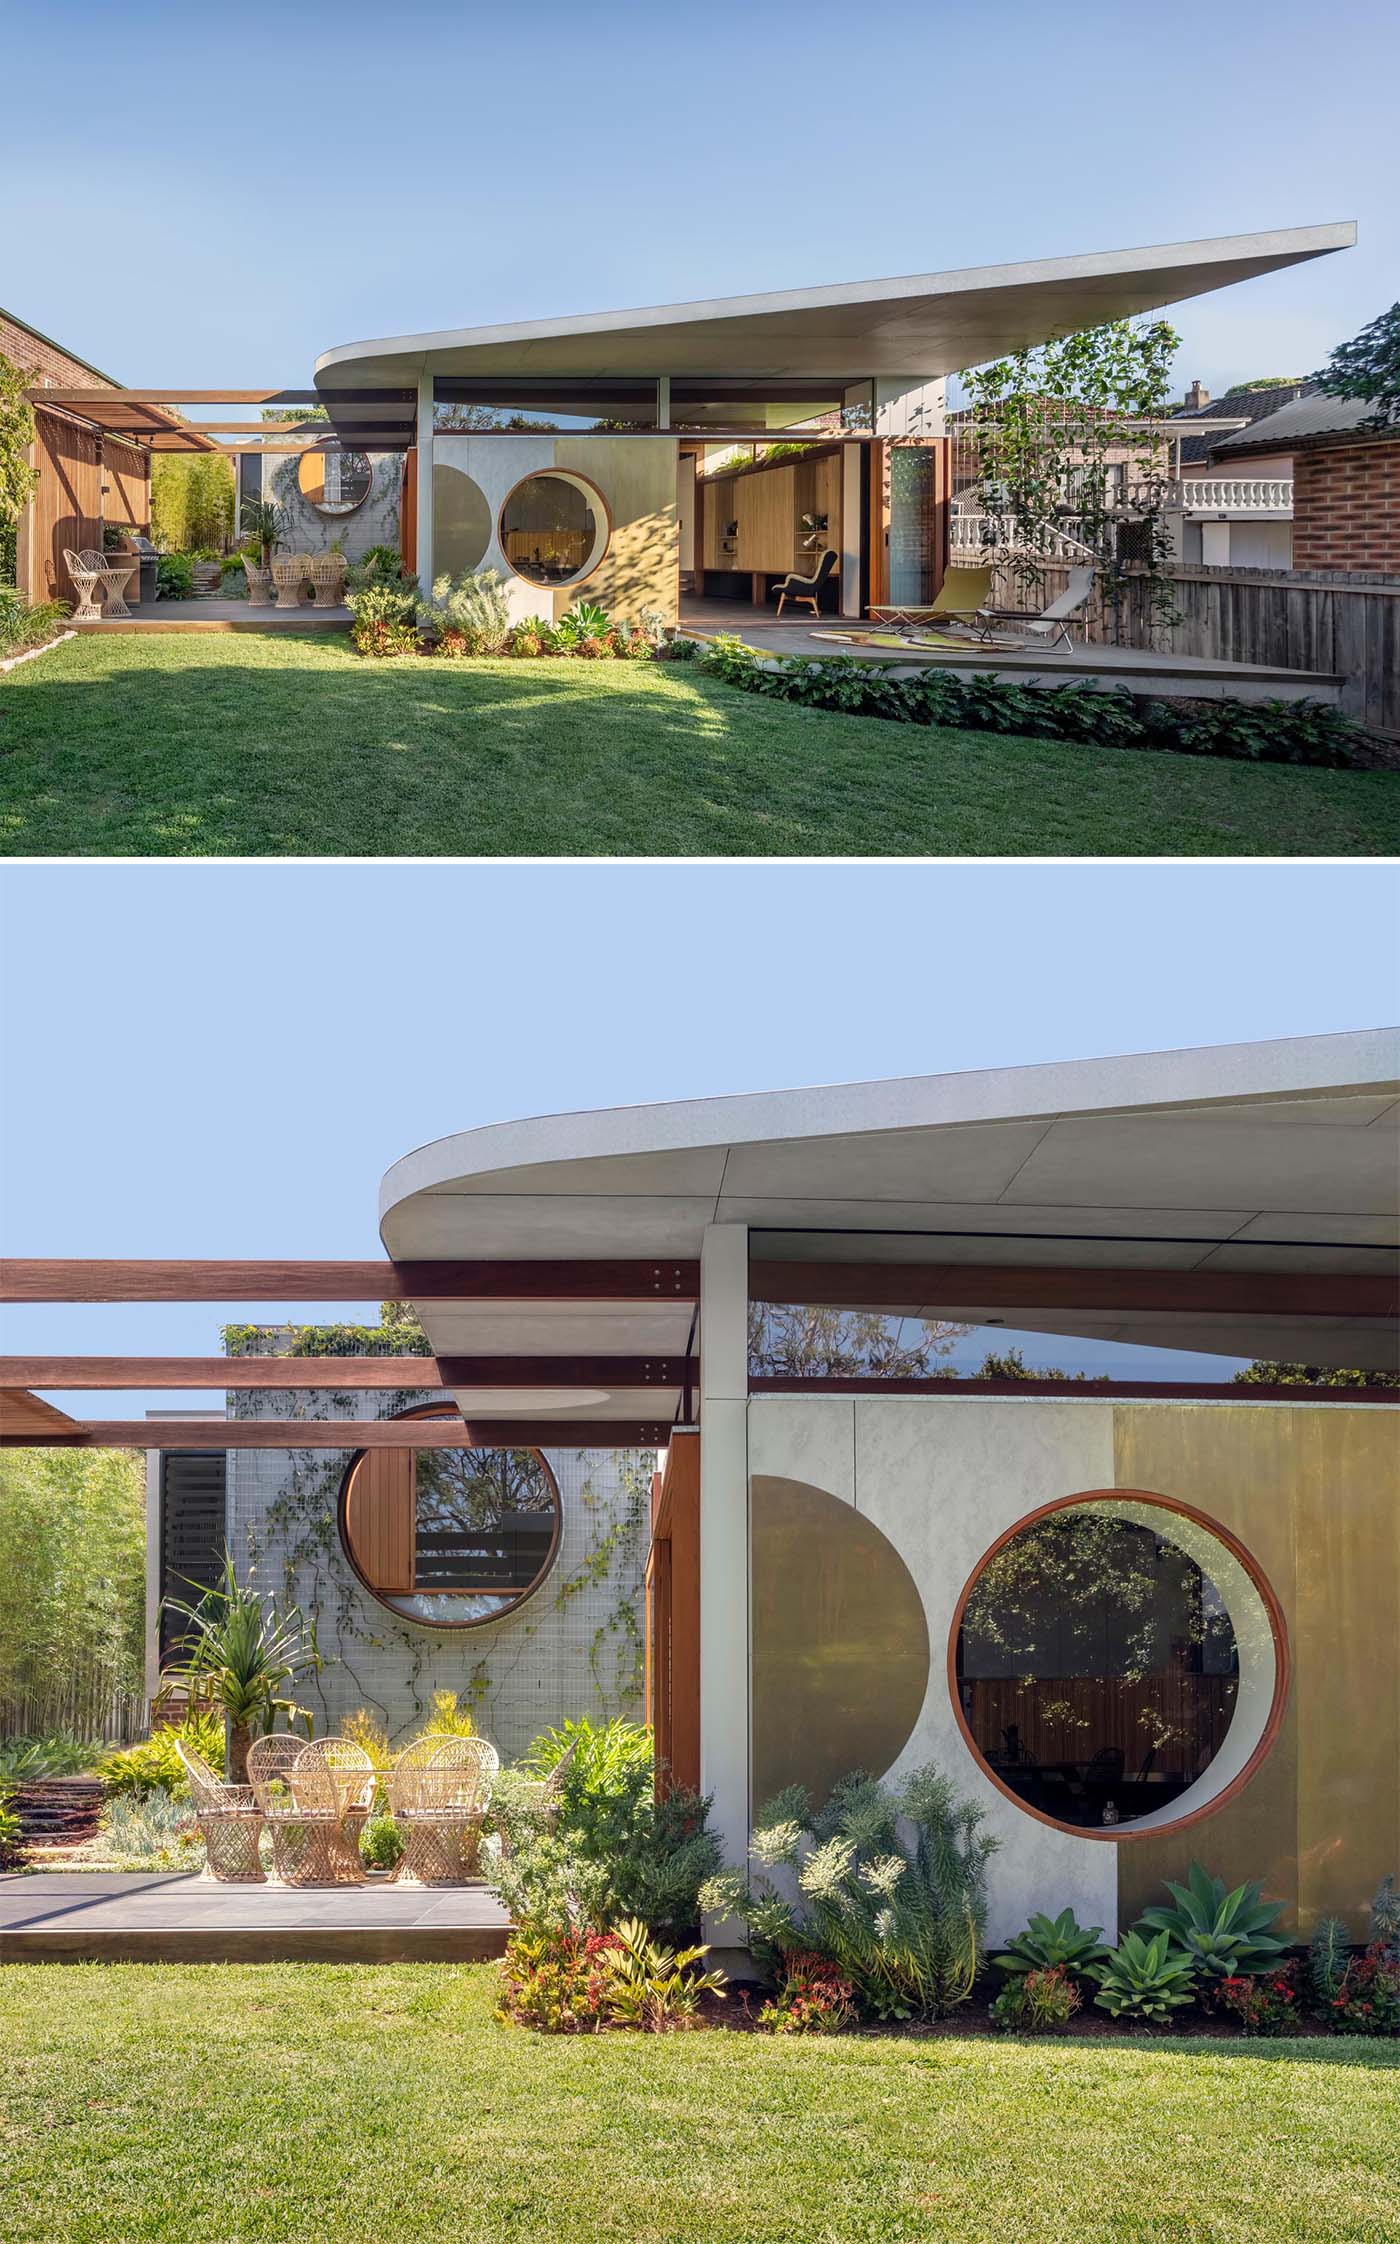 A rear home addition with circular accents, and designed for indoor / outdoor living.